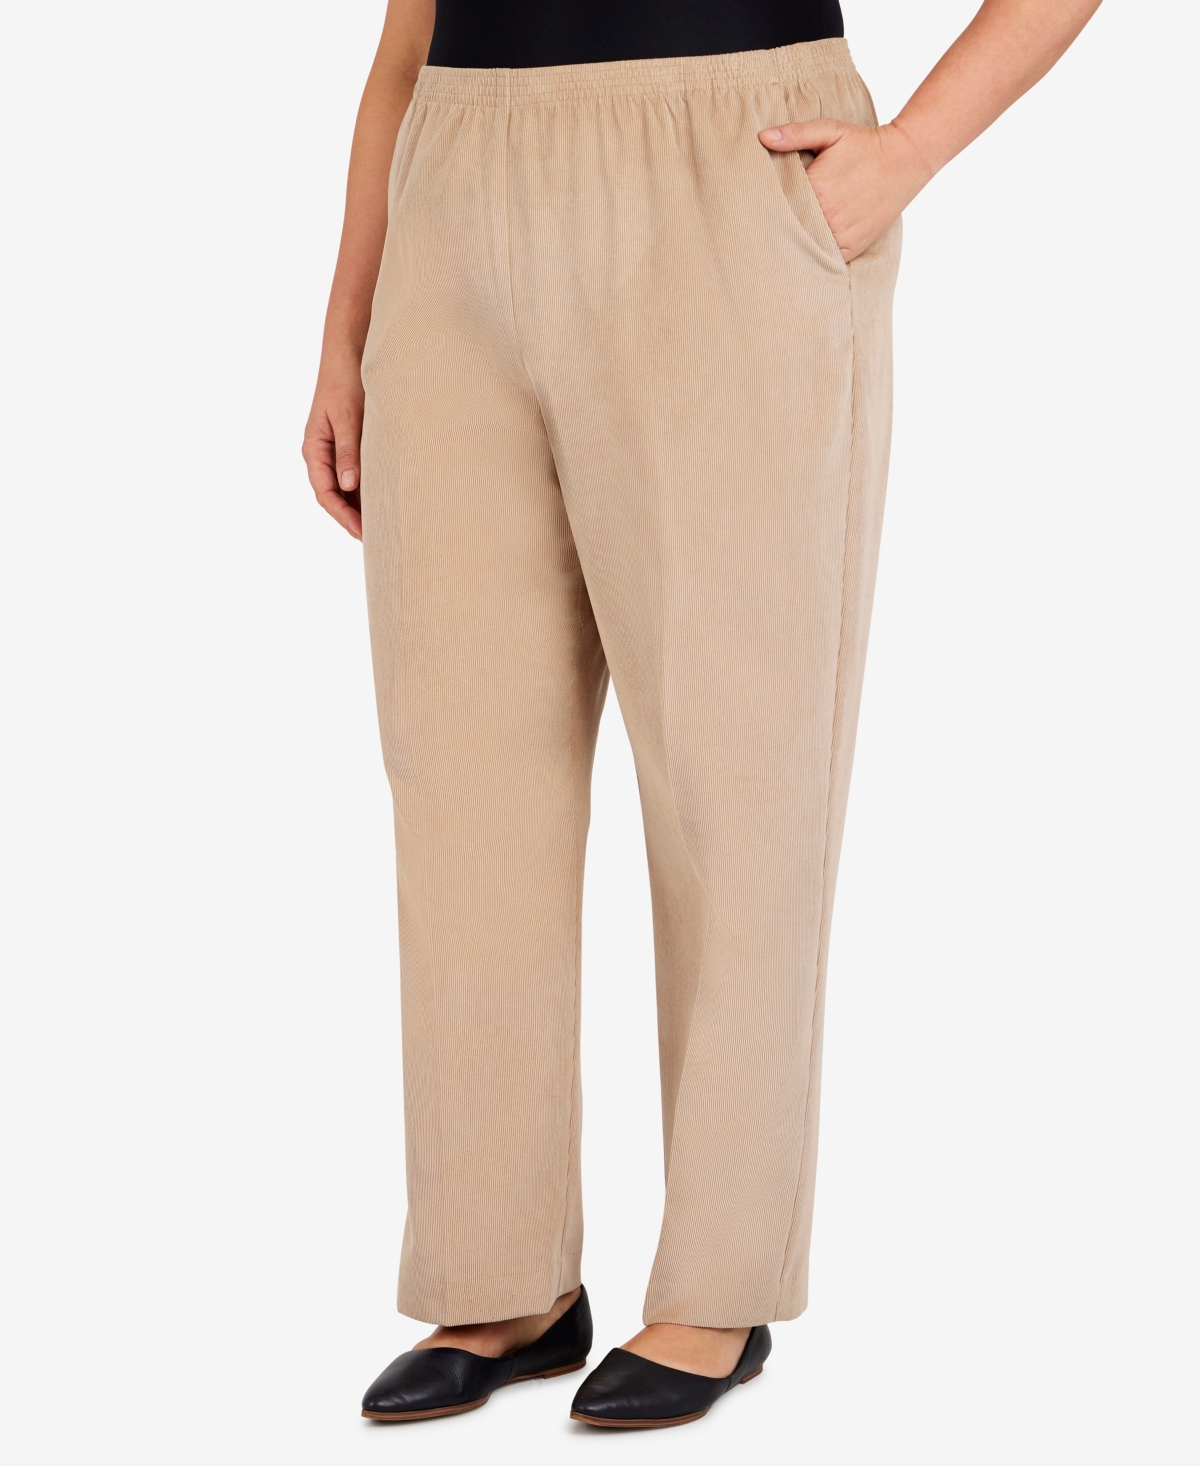 Alfred Dunner Plus Size Classics Stretch Waist Corduroy Short Length Pants In Tan